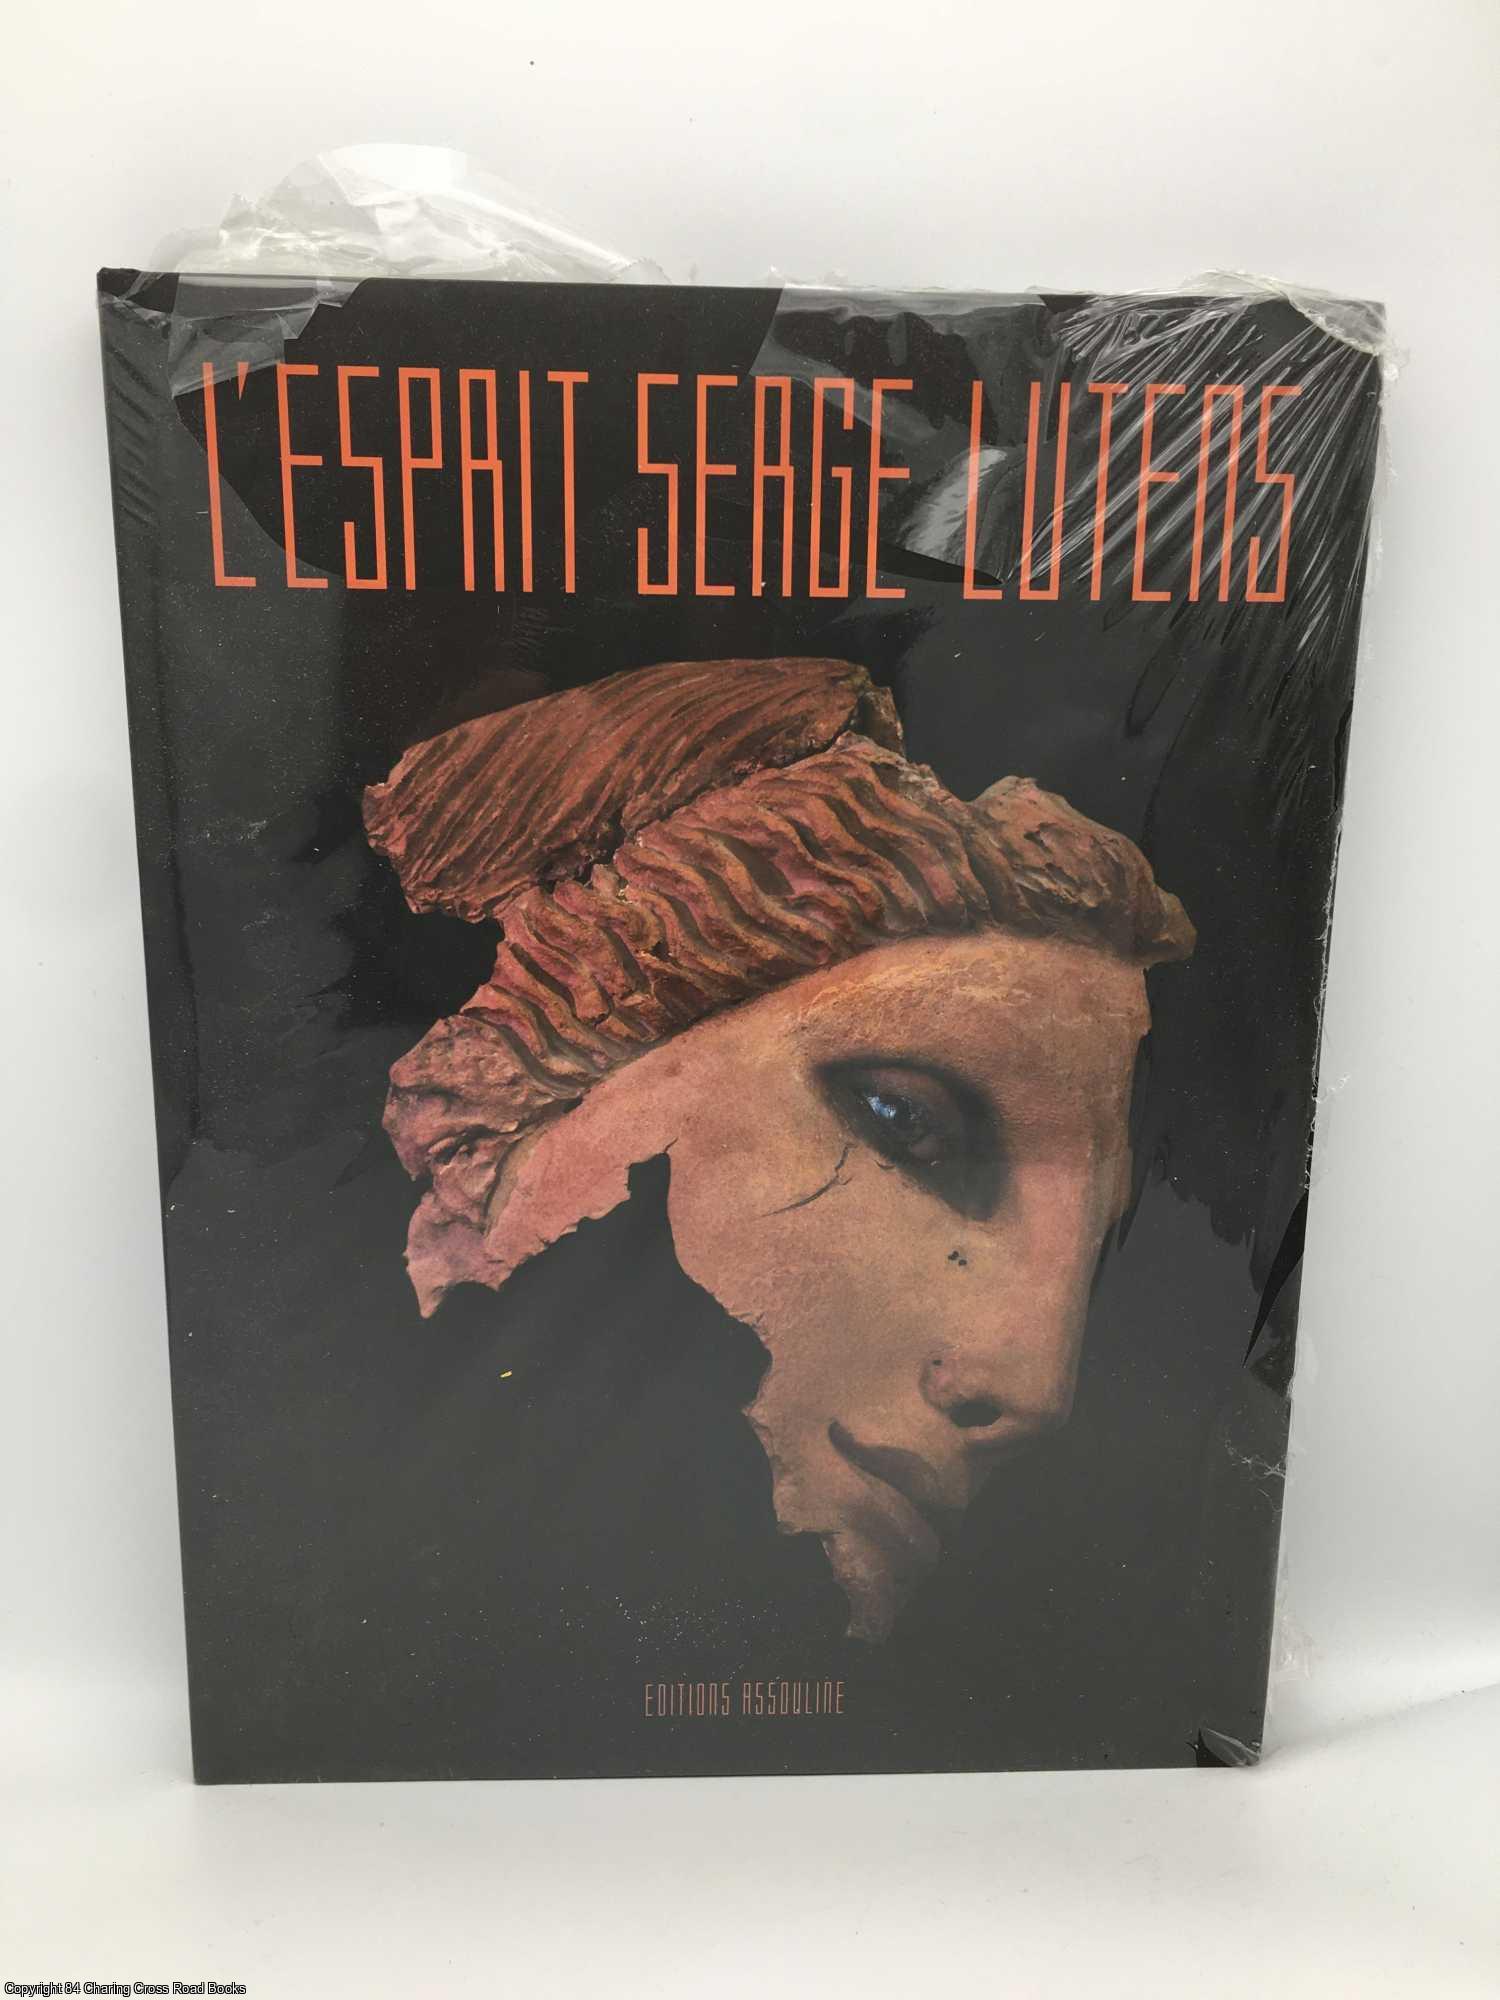 L'Esprit Serge Lutens: The Spirit of Beauty by Serge Lutens on 84 Charing  Cross Rare Books